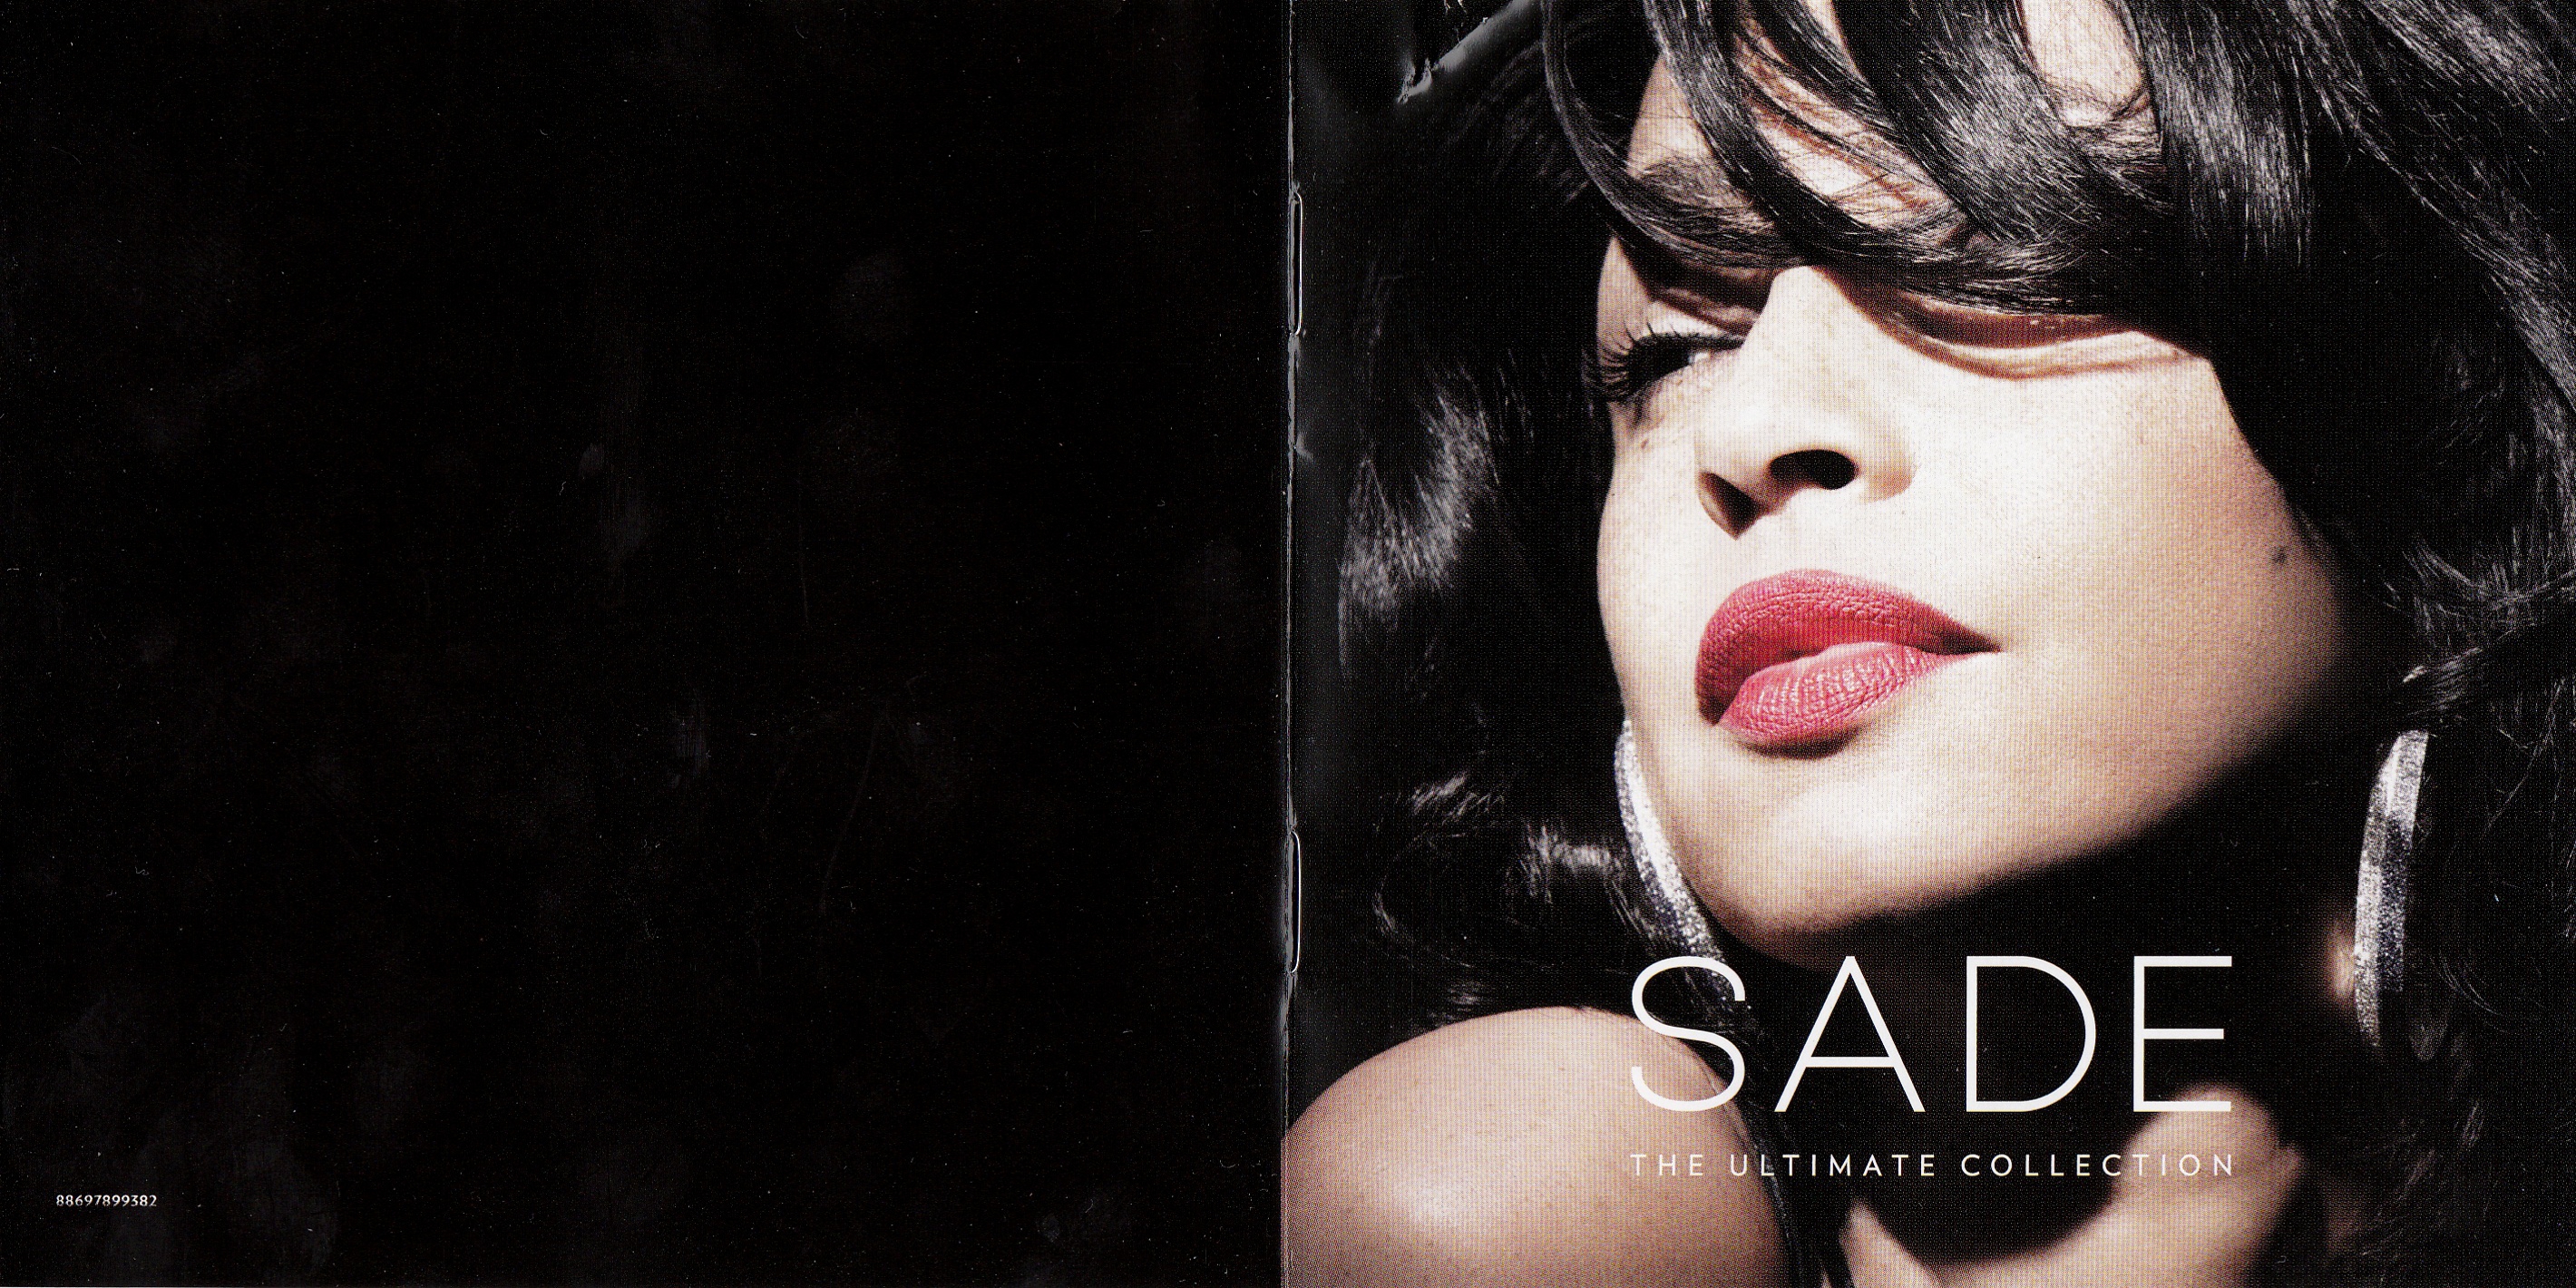 Galeria - Sade - The Ultimate Collection - Booklet 1-4.jpg